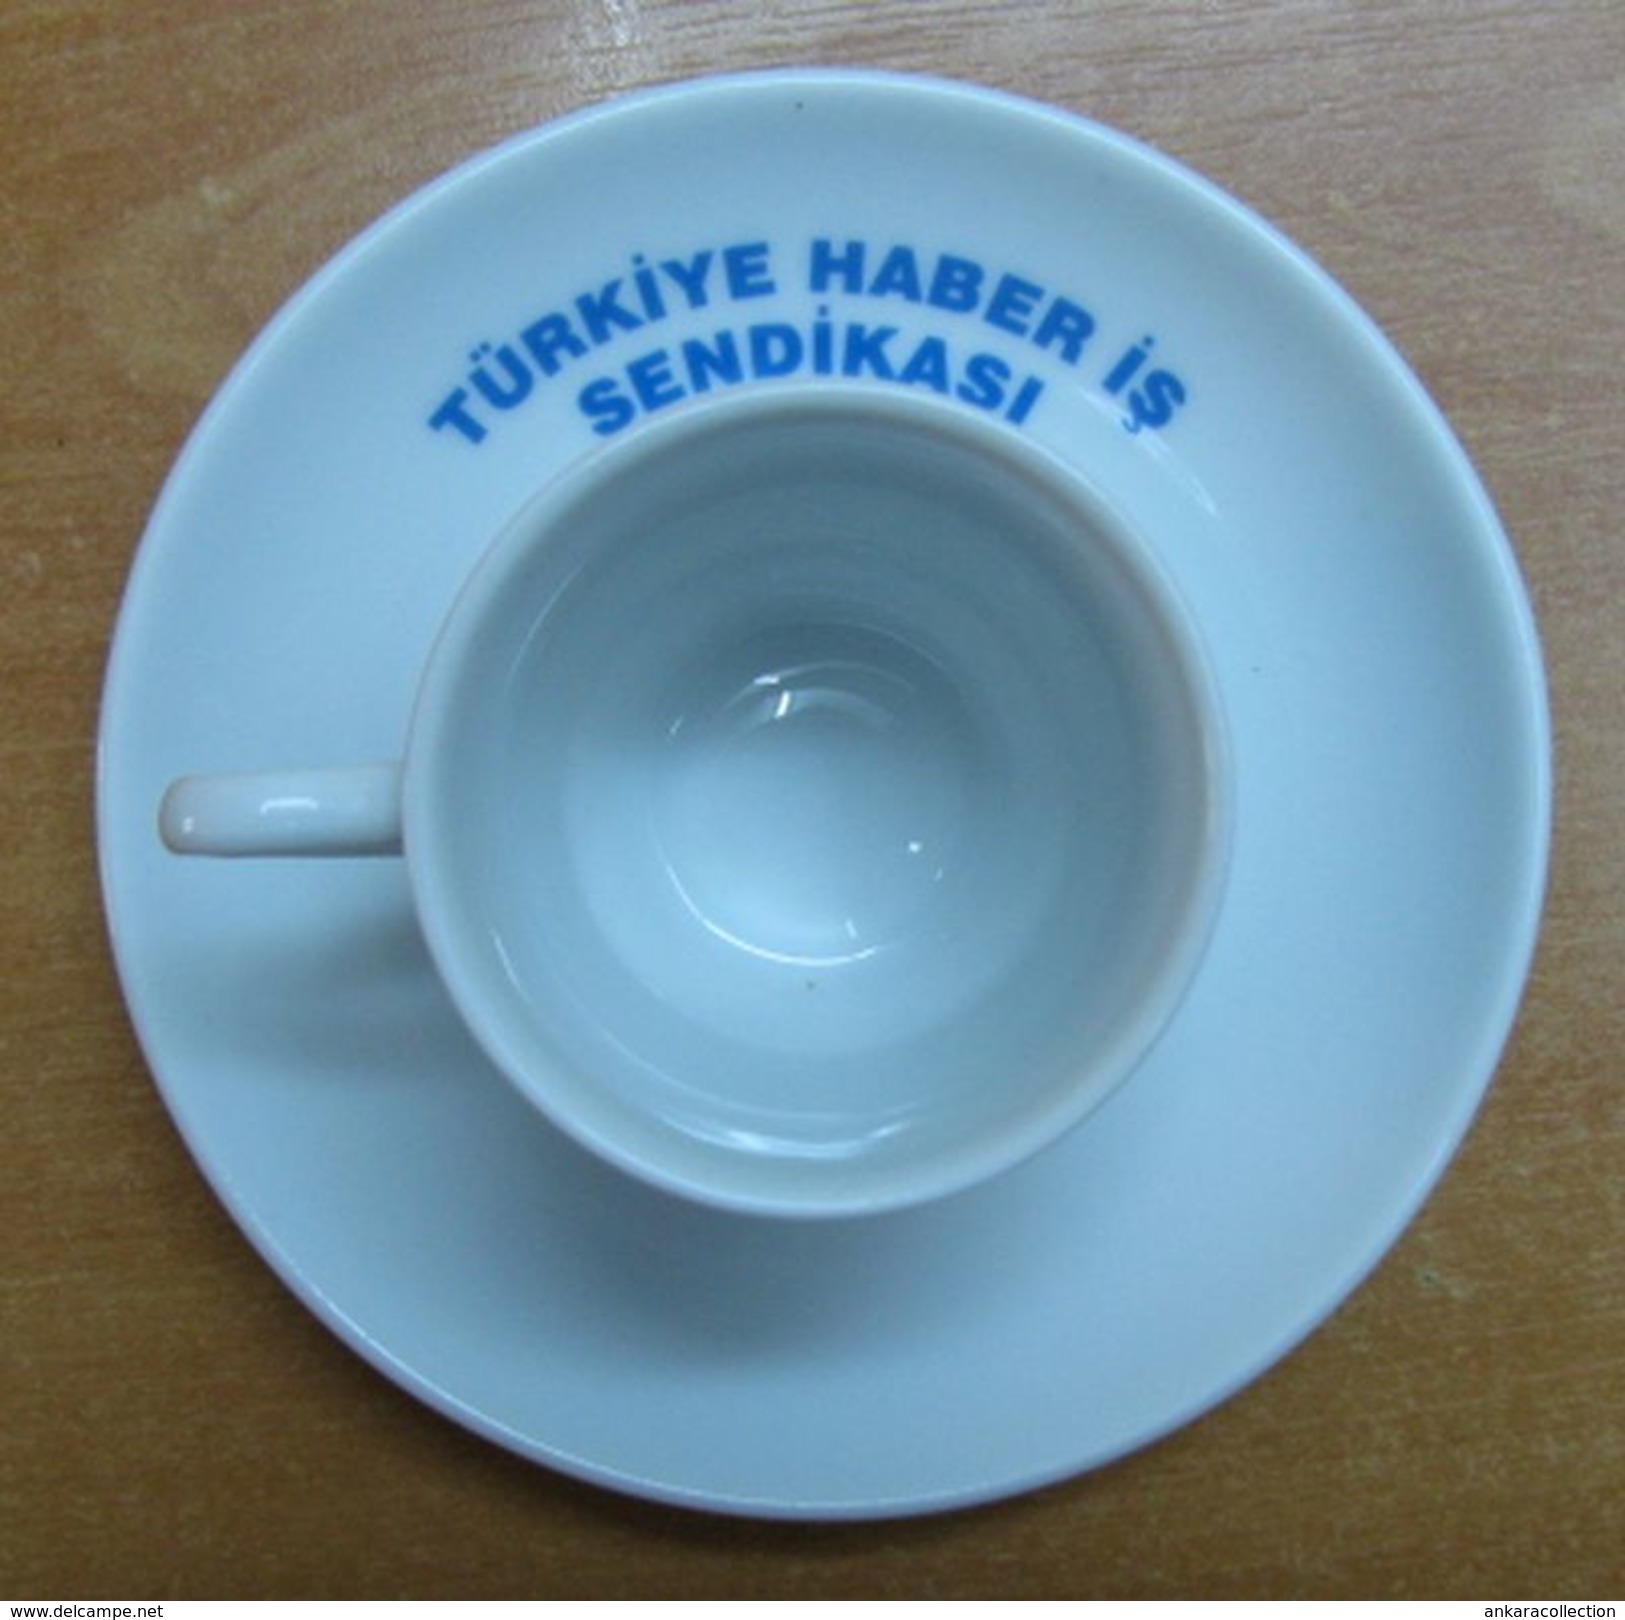 AC - TURKEY HABER IS TRADE UNION PORCELAIN COFFEE CUP - MUG & SAUCER FROM TURKEY - Cups